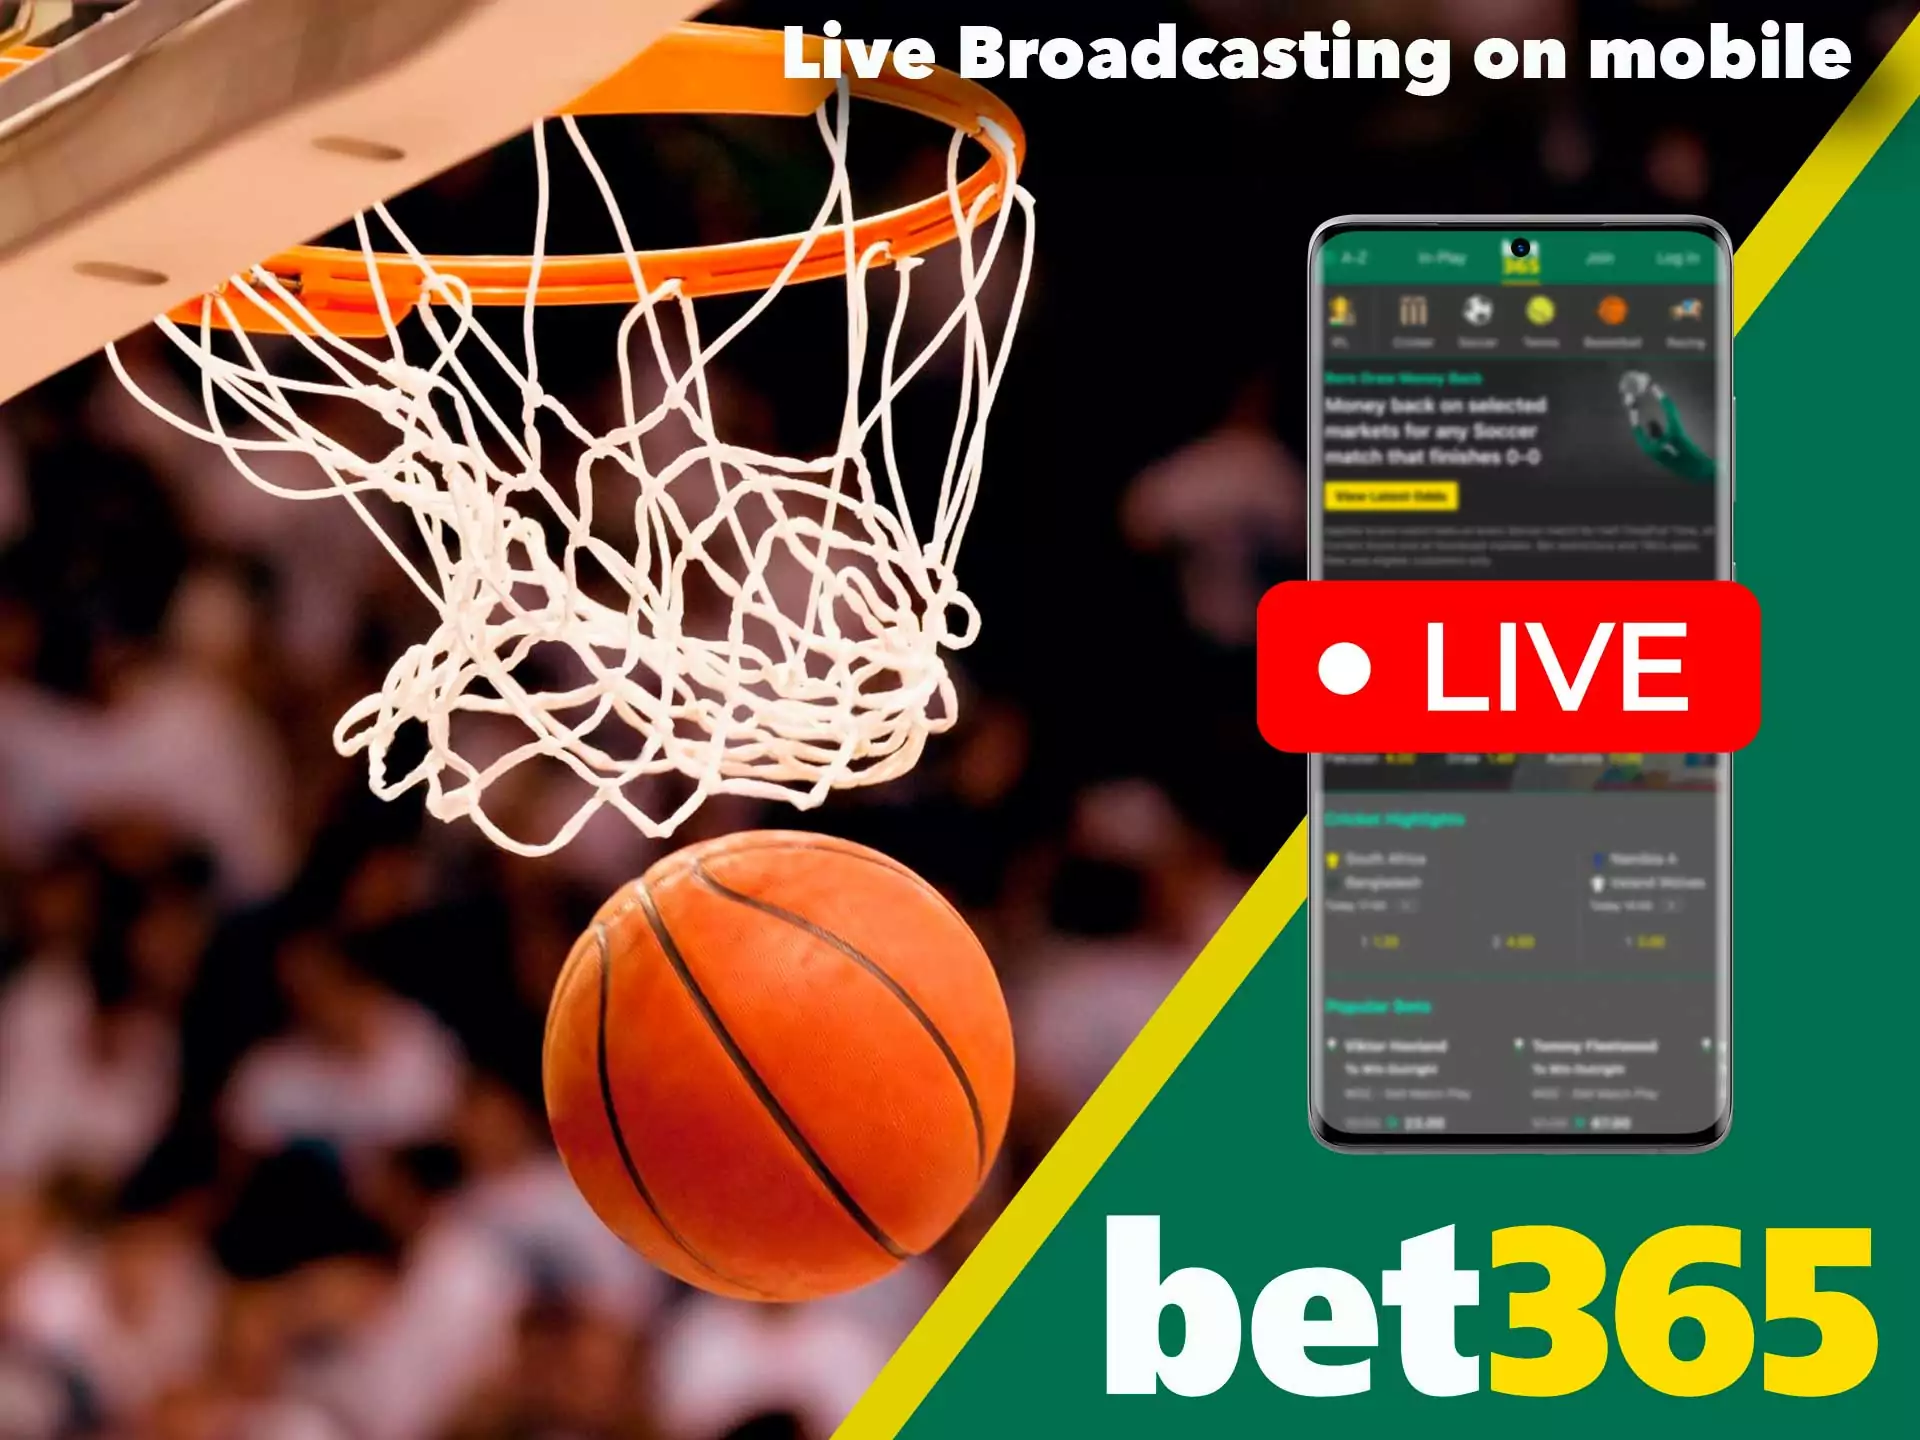 At Bet365 app you can watch live broadcasts of matches online.